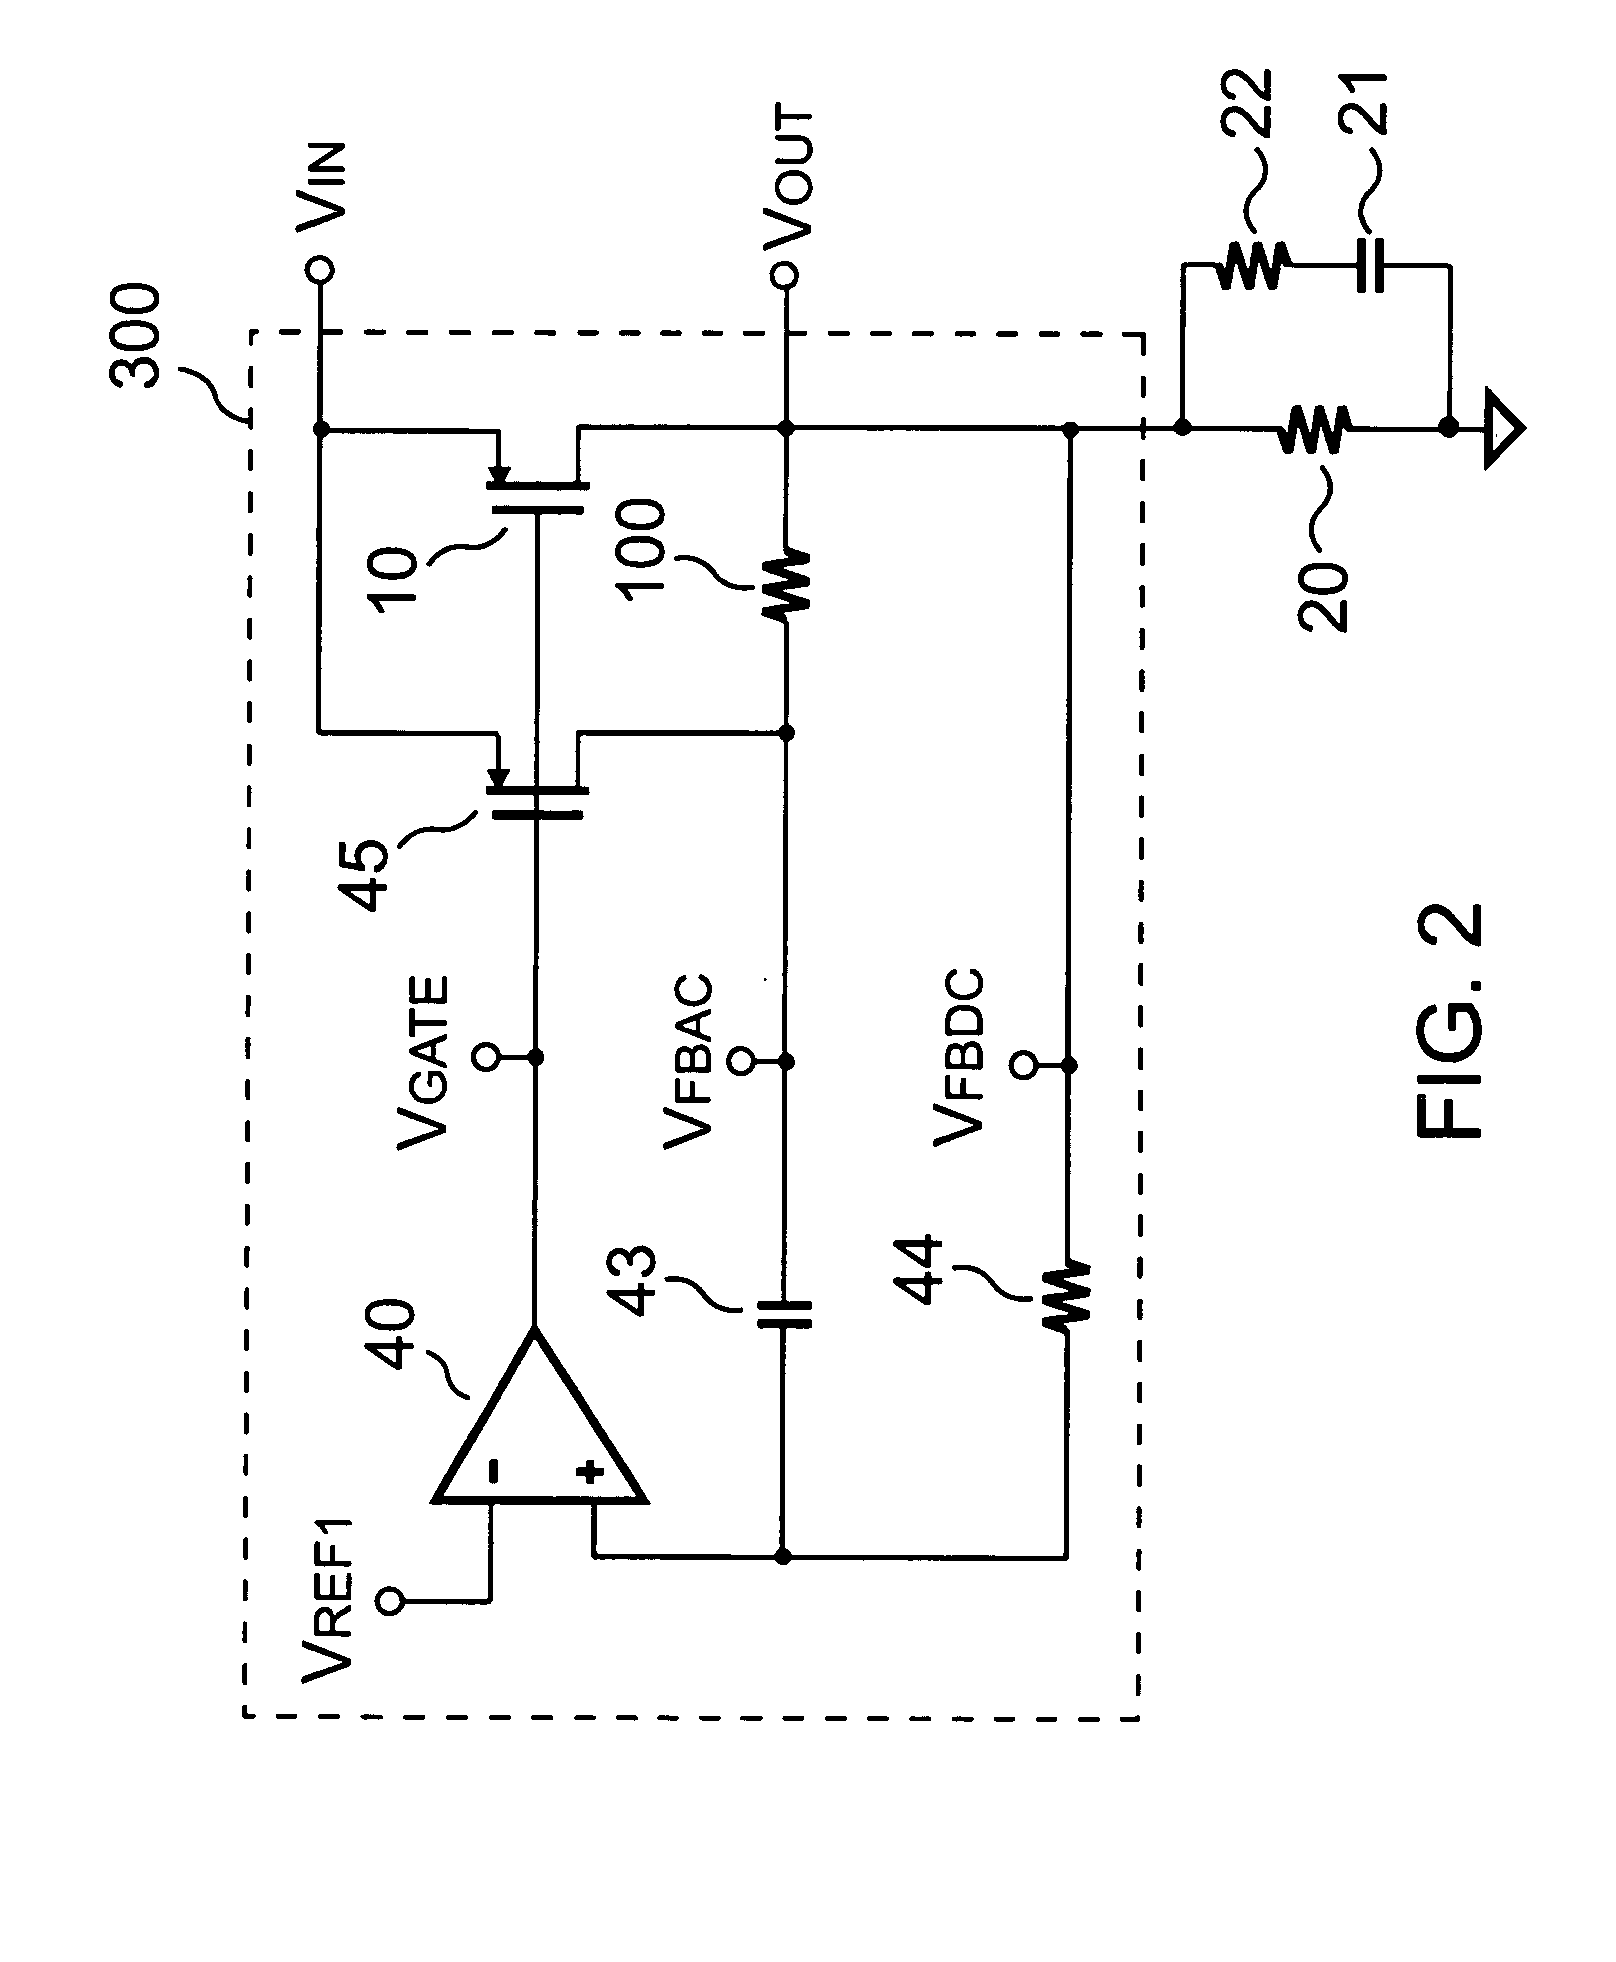 Low drop-out voltage regulator and an adaptive frequency compensation method for the same